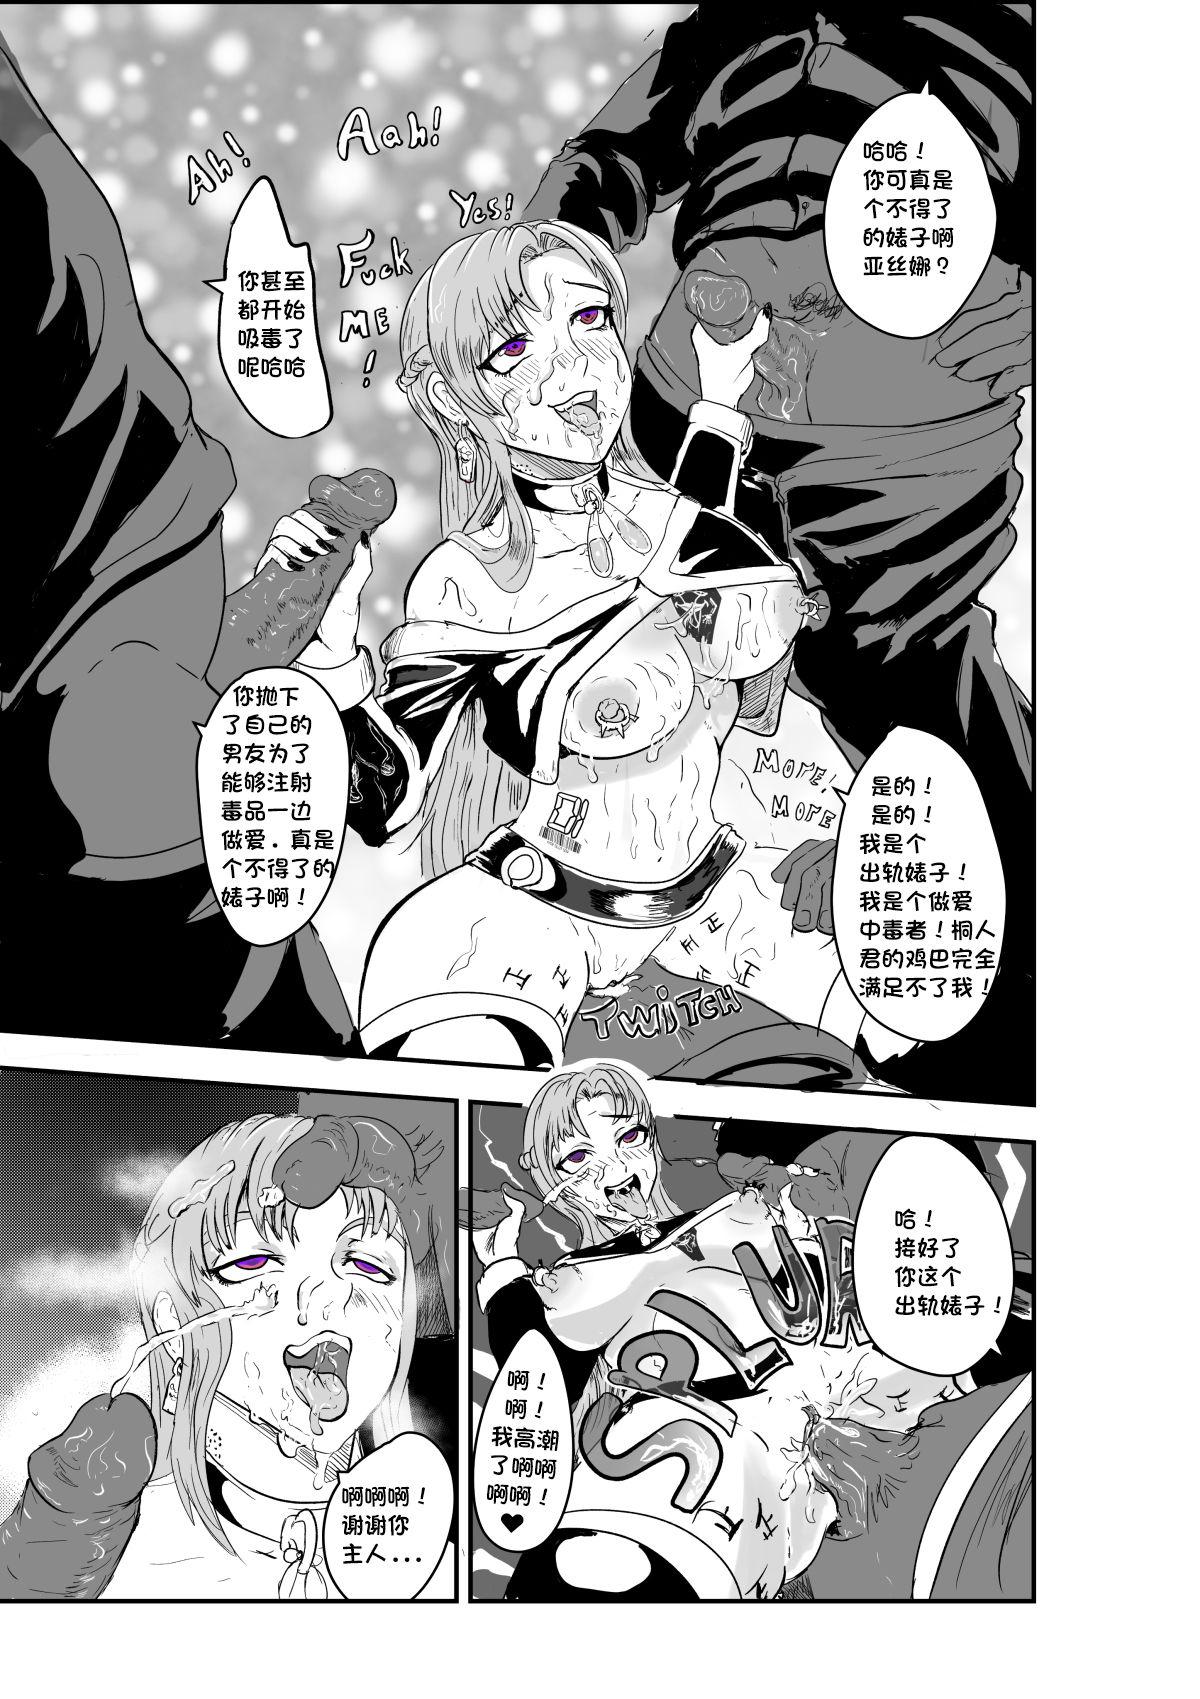 Fisting SAO Lustful Obedience Release - Sword art online Nut - Page 5